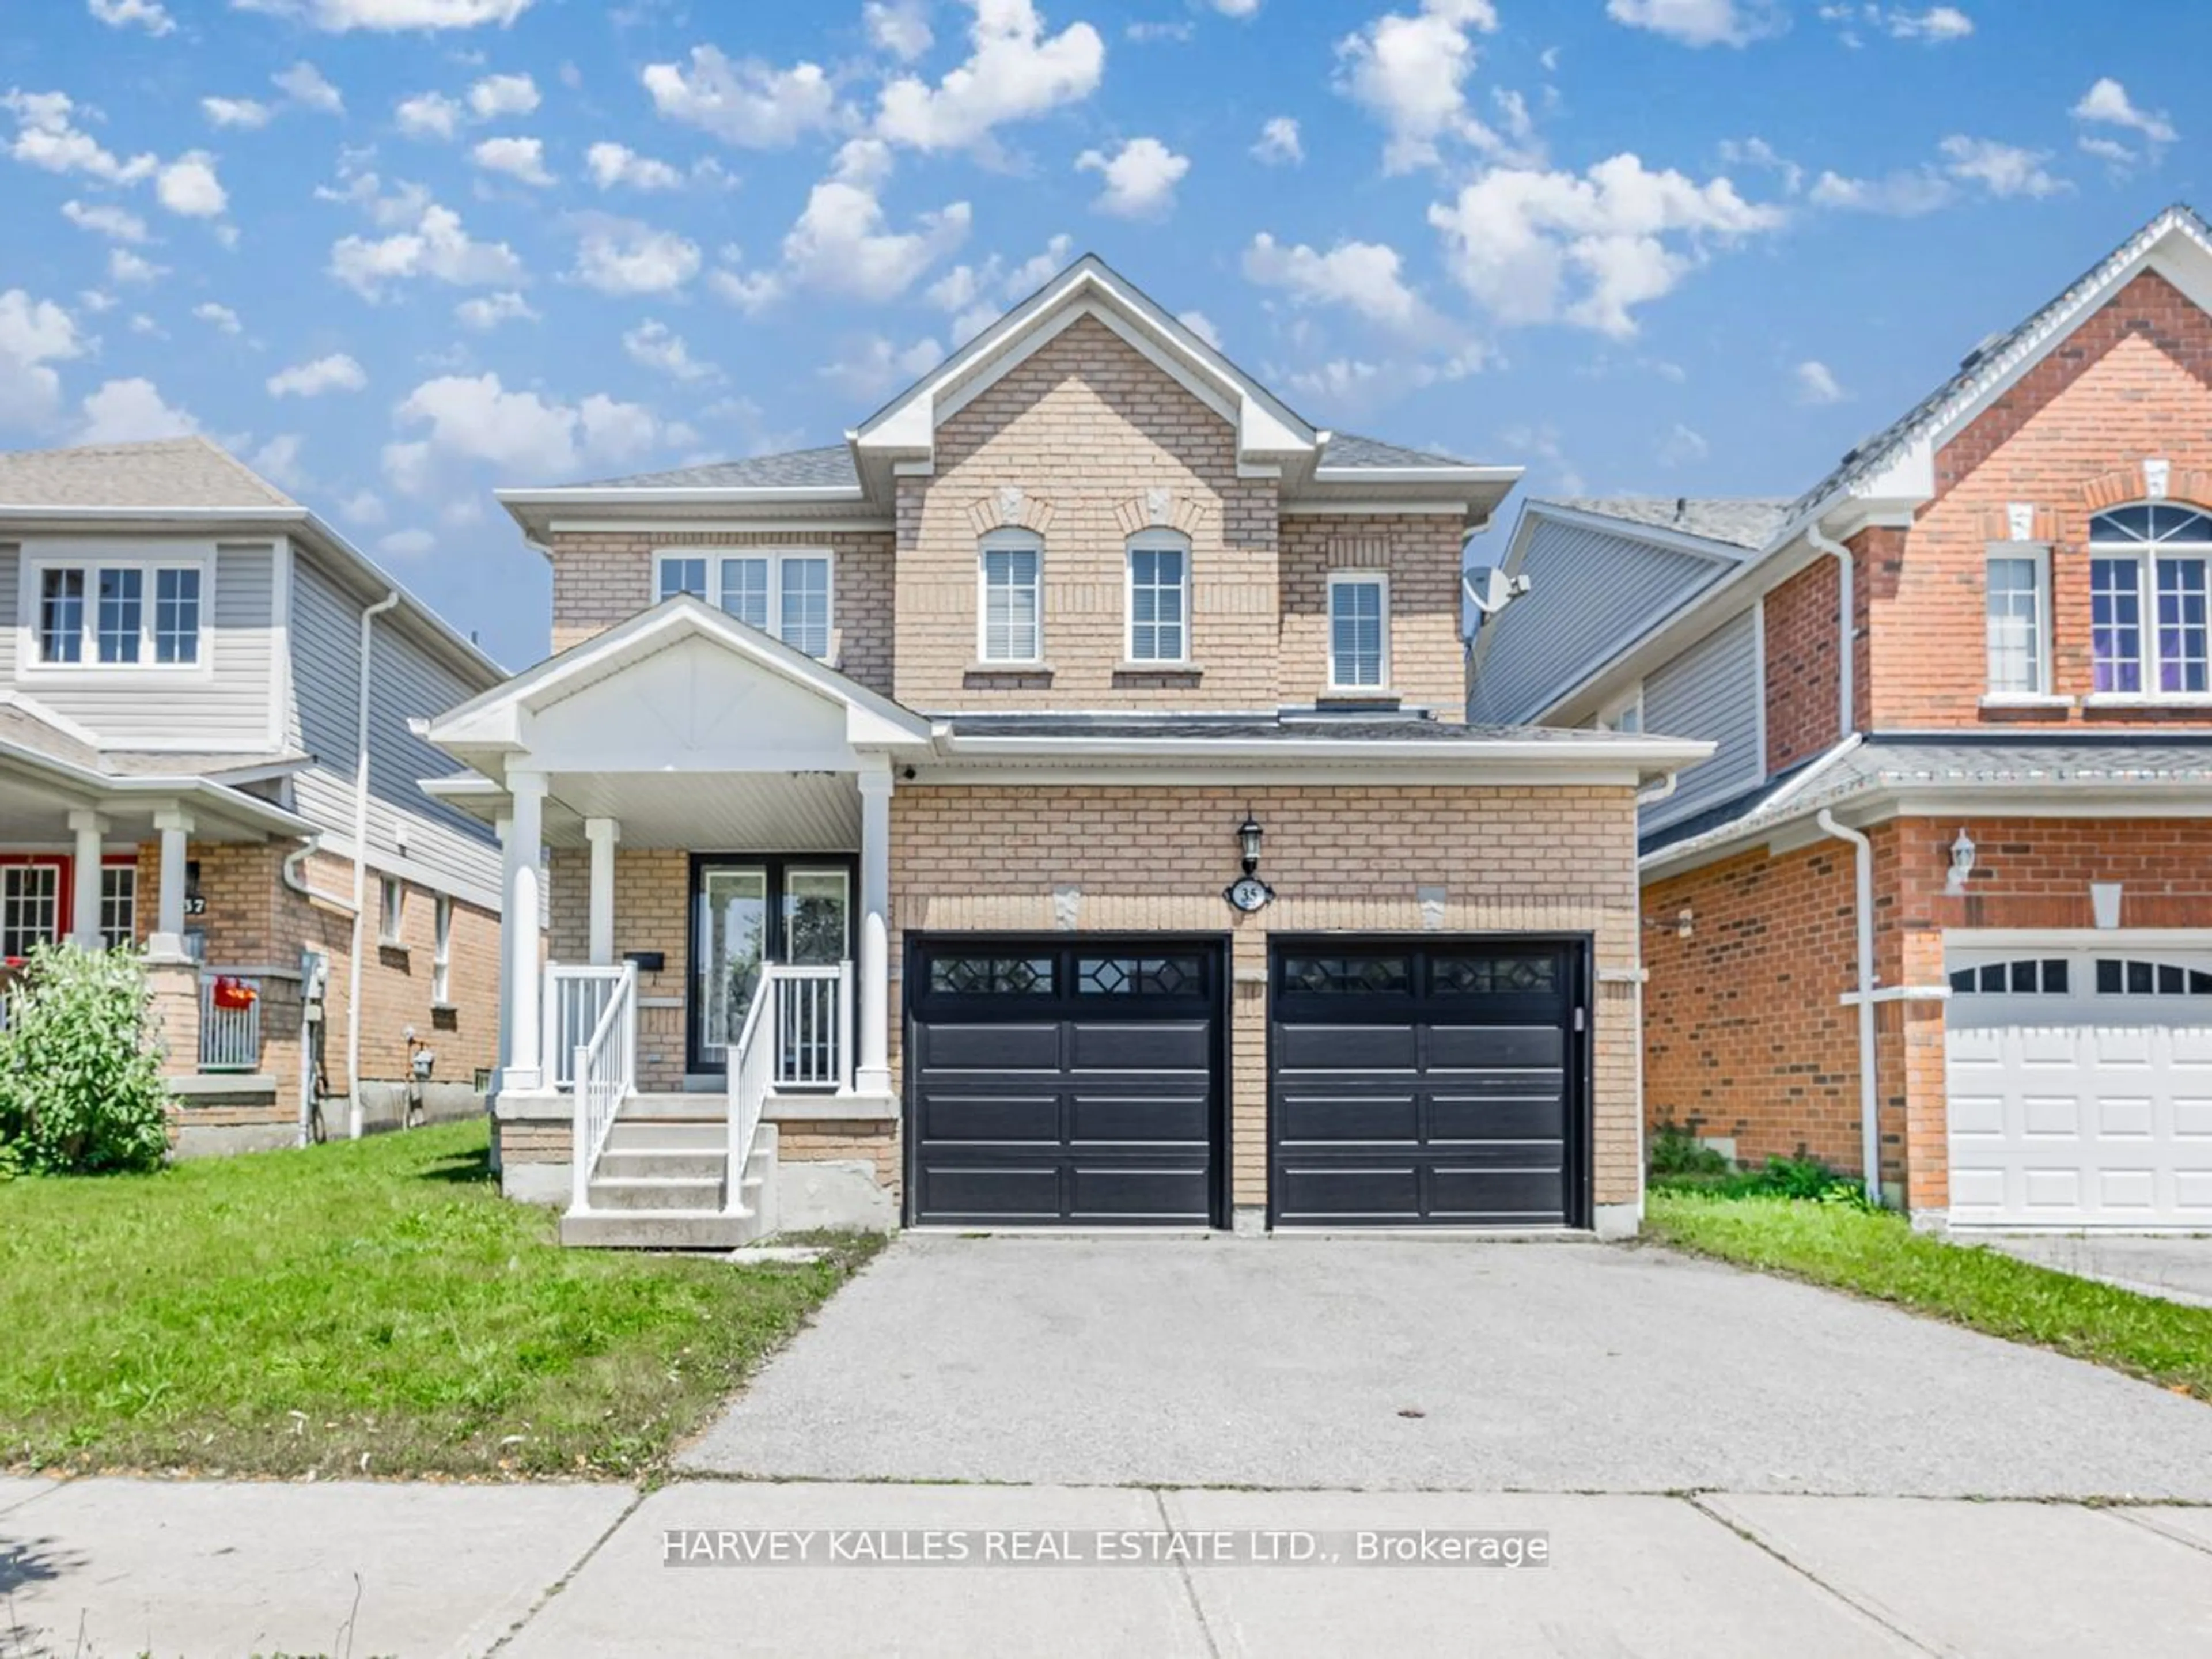 Home with brick exterior material for 35 Baycliffe Dr, Whitby Ontario L1P 1W8